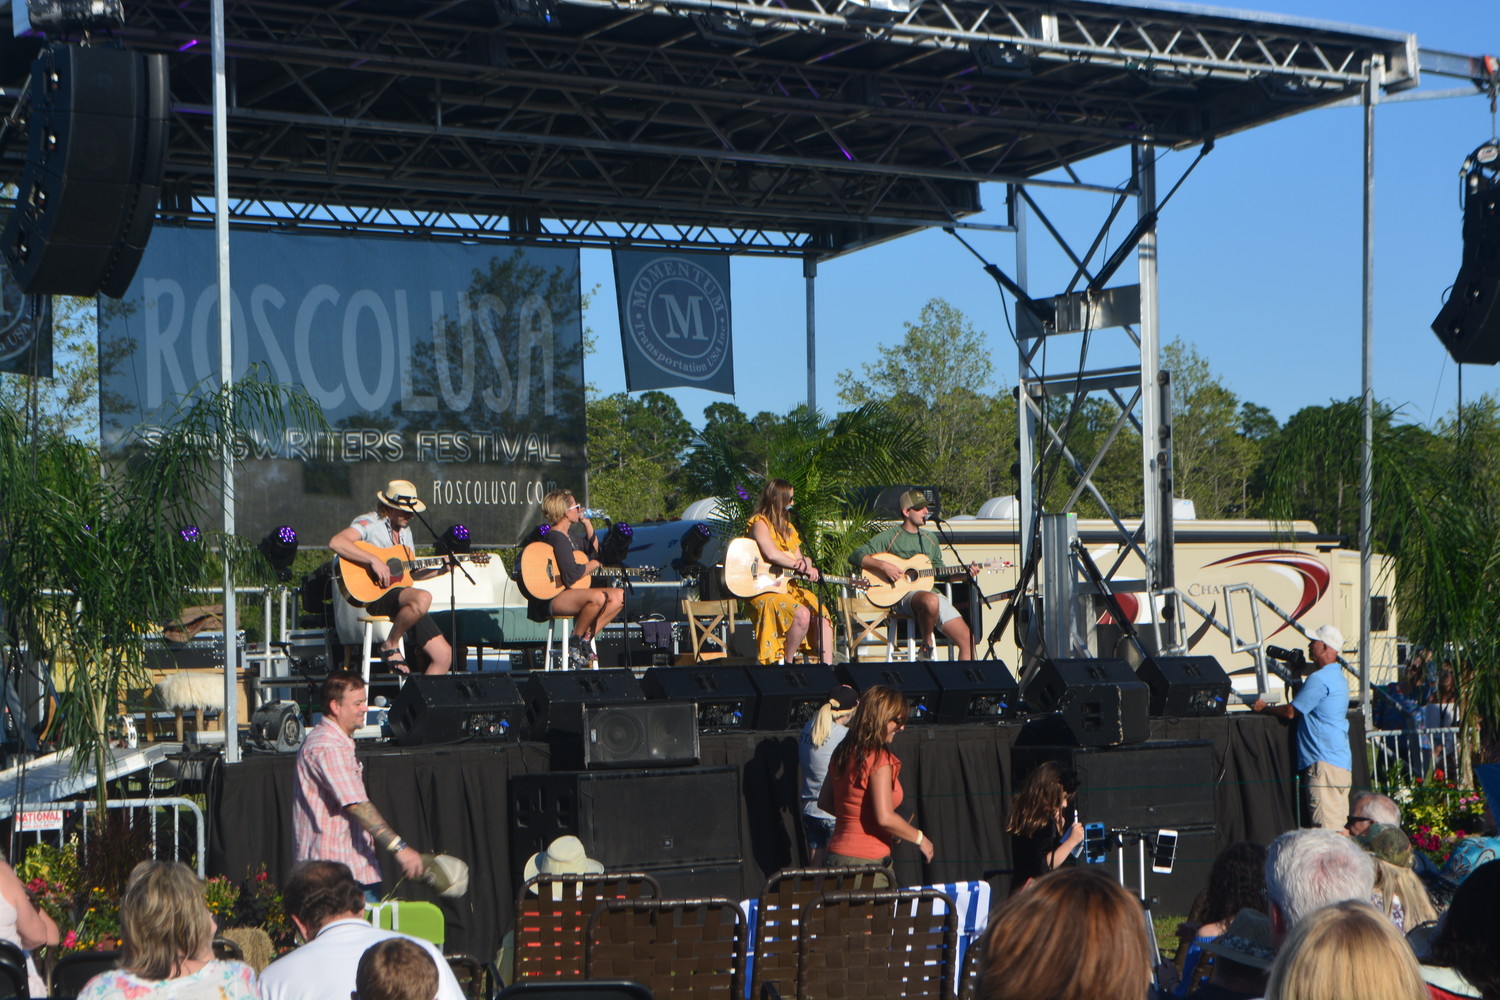 Songwriters share their stories and perform popular songs on-stage at the 2018 Roscolusa Songwriters Festival, held April 28 in Nocatee.